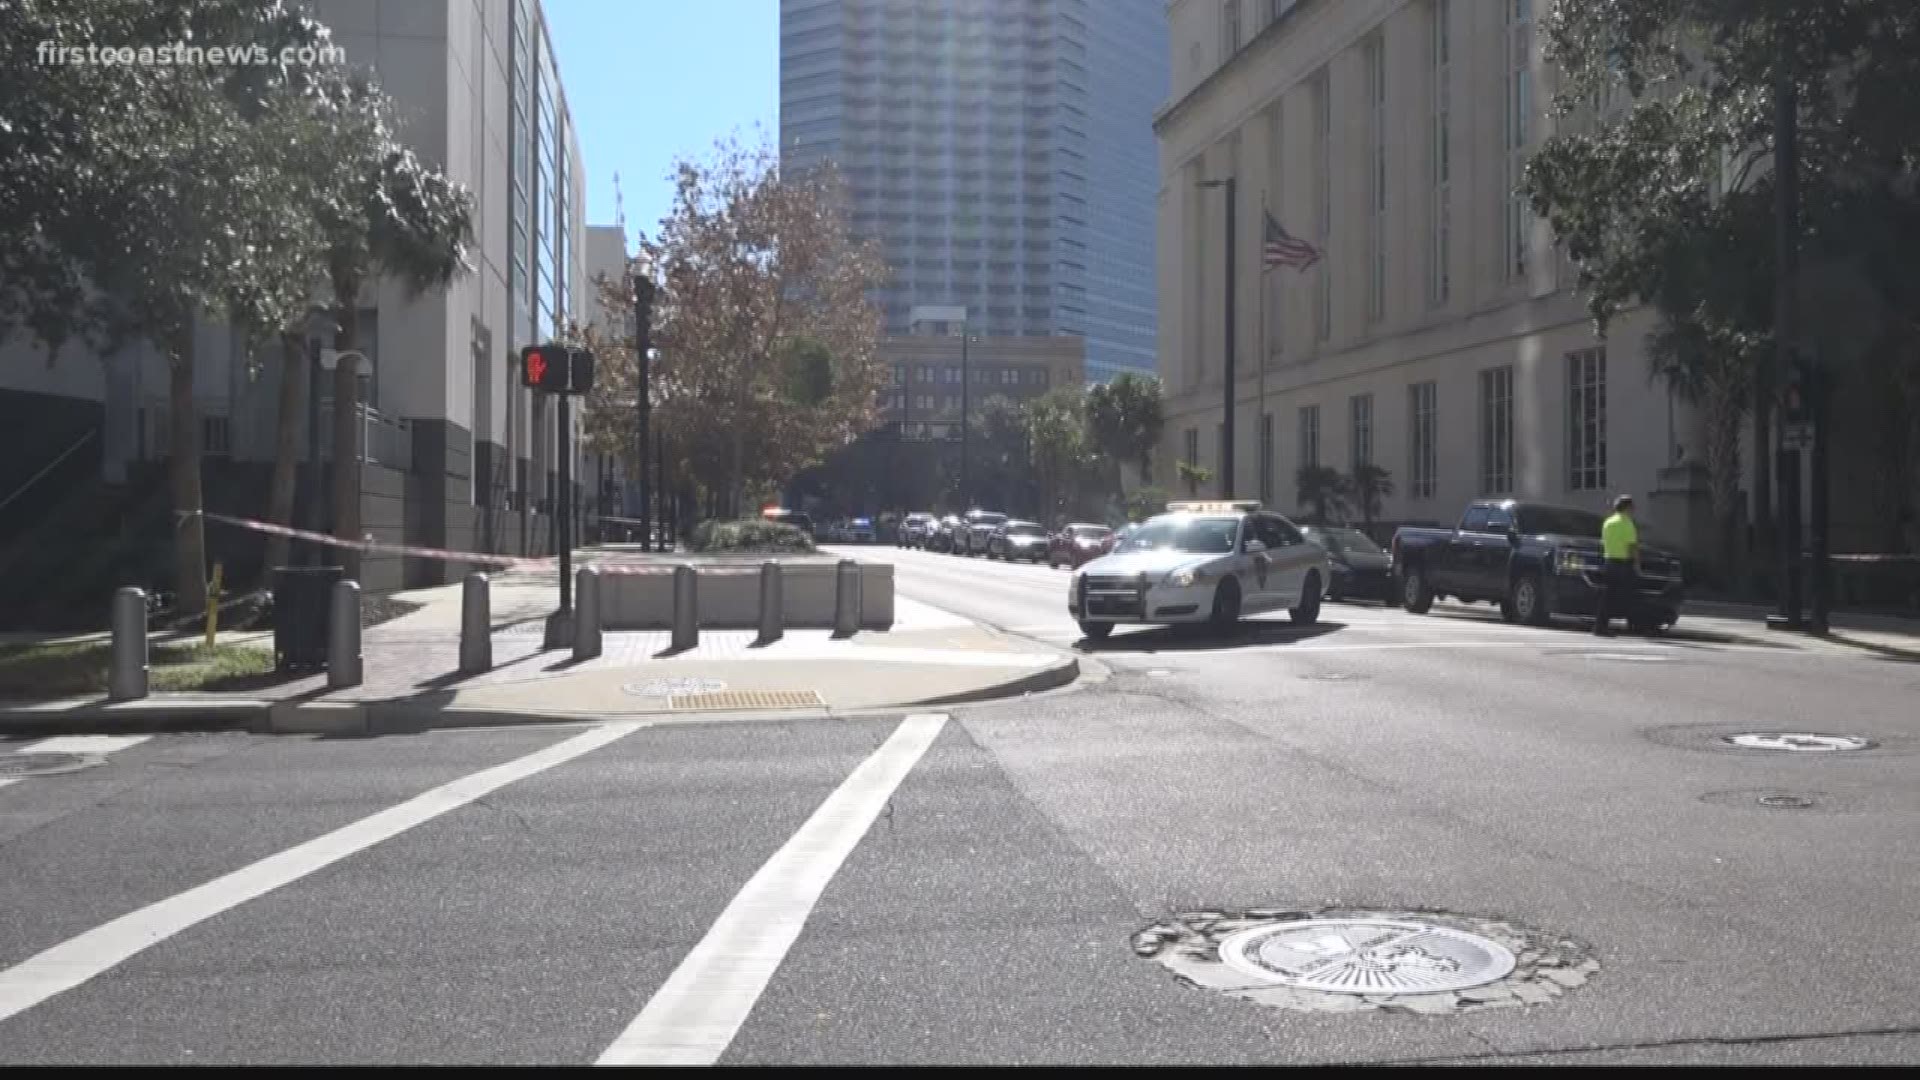 The suspicious package found in the mailroom of the federal courthouse in Downtown Jacksonville Monday is not a threat to the public, according to the FBI.